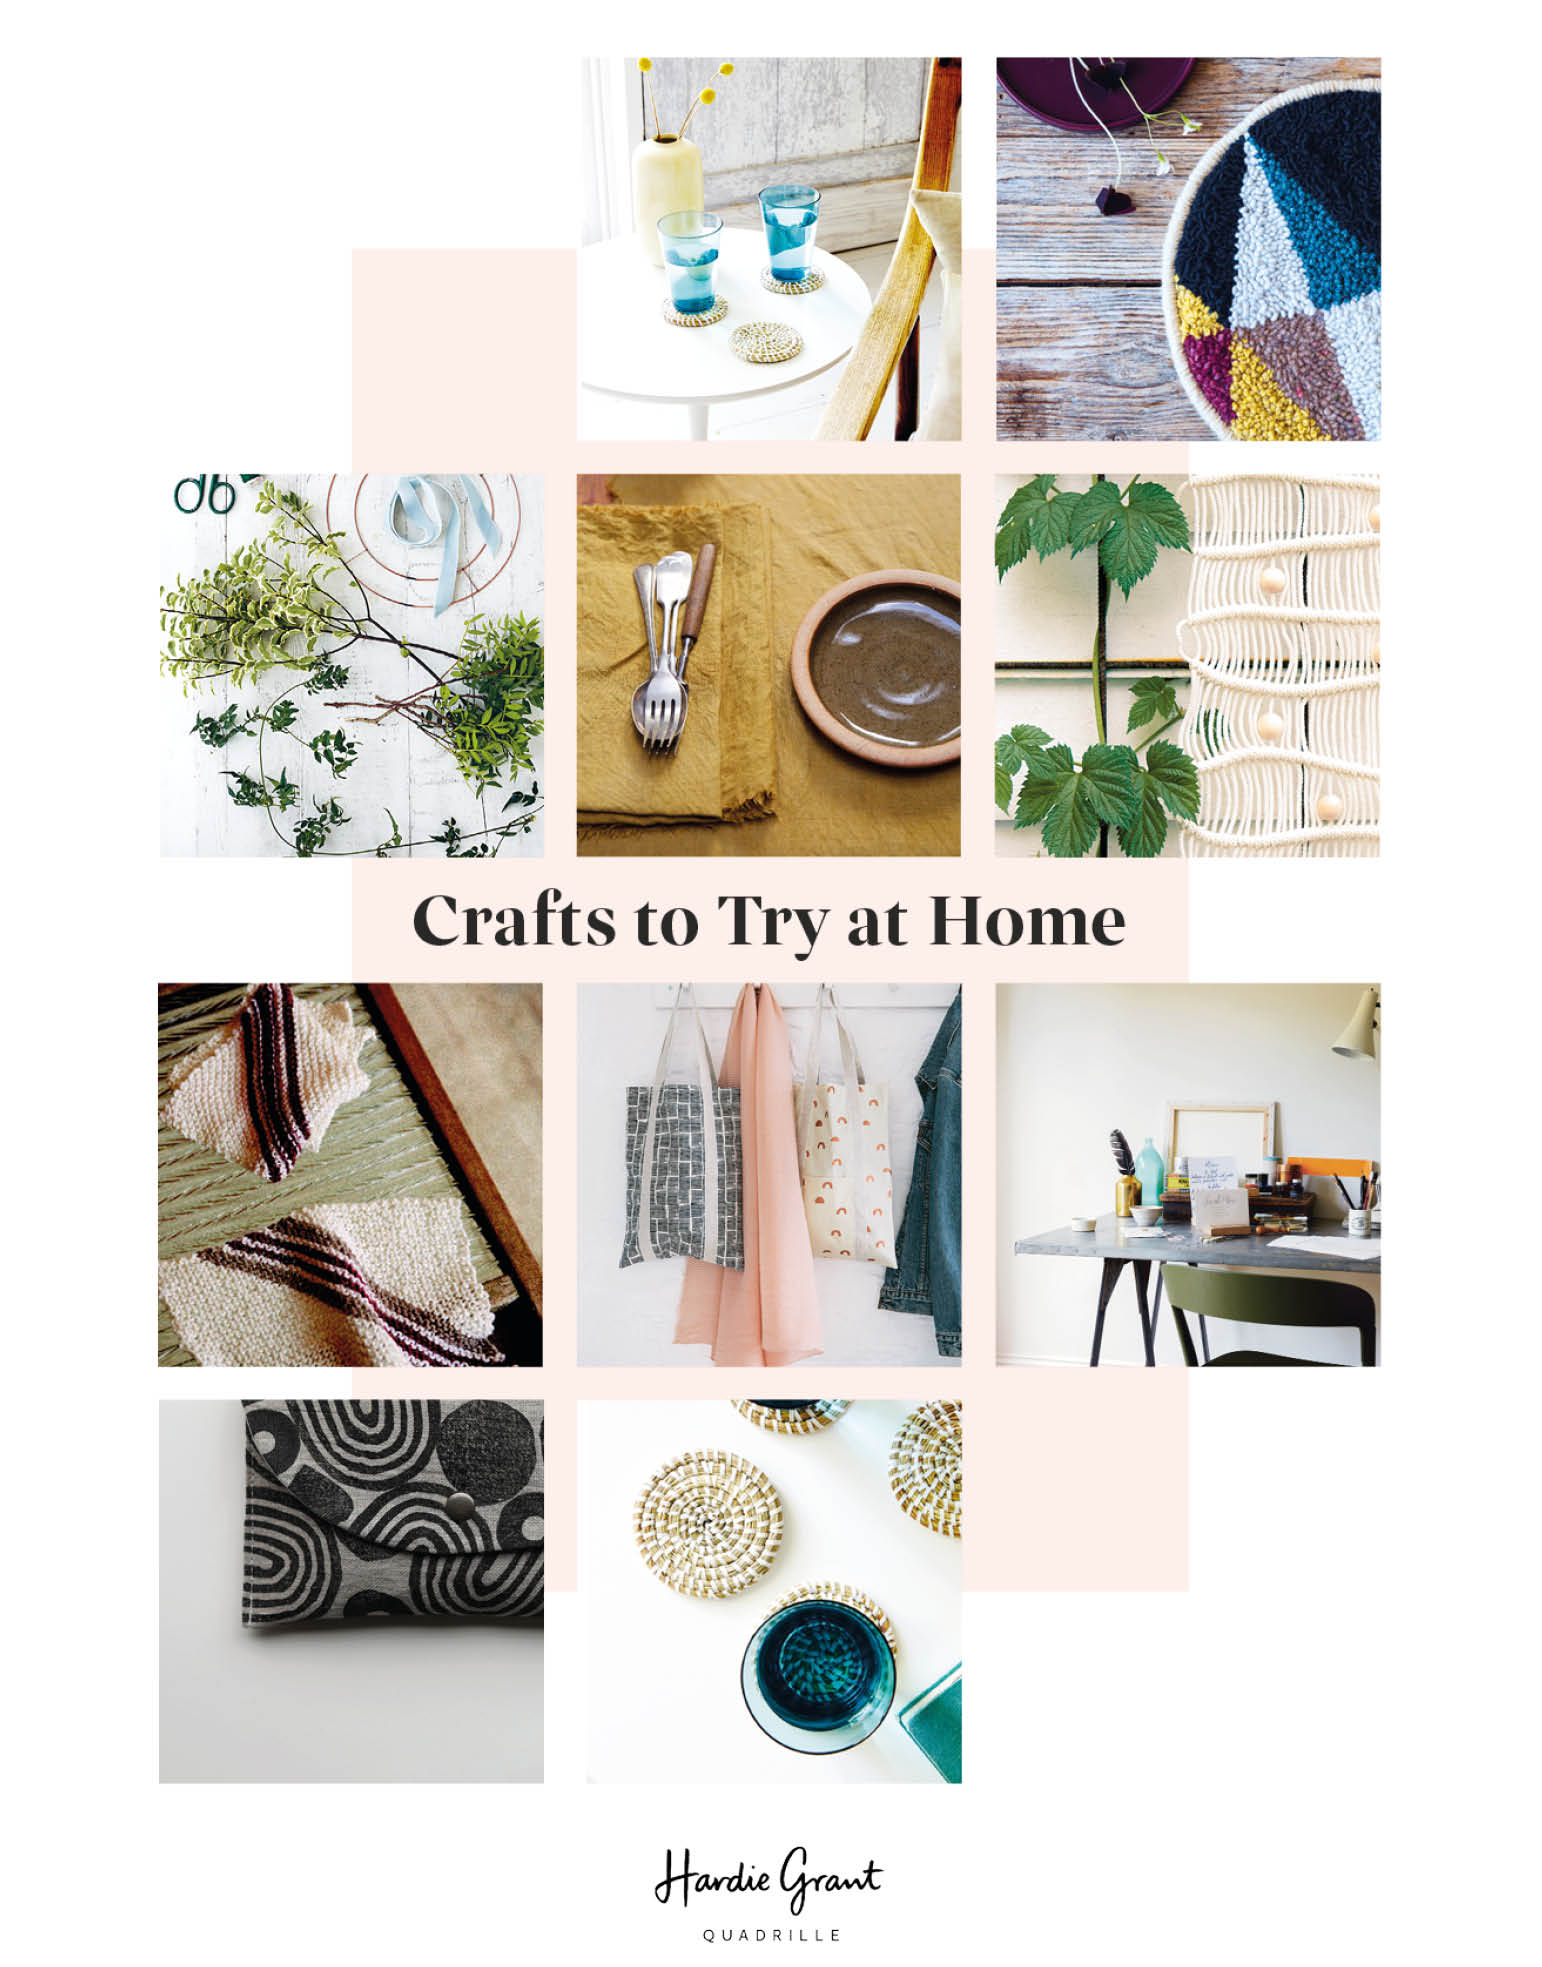 Crafts to Try at Home